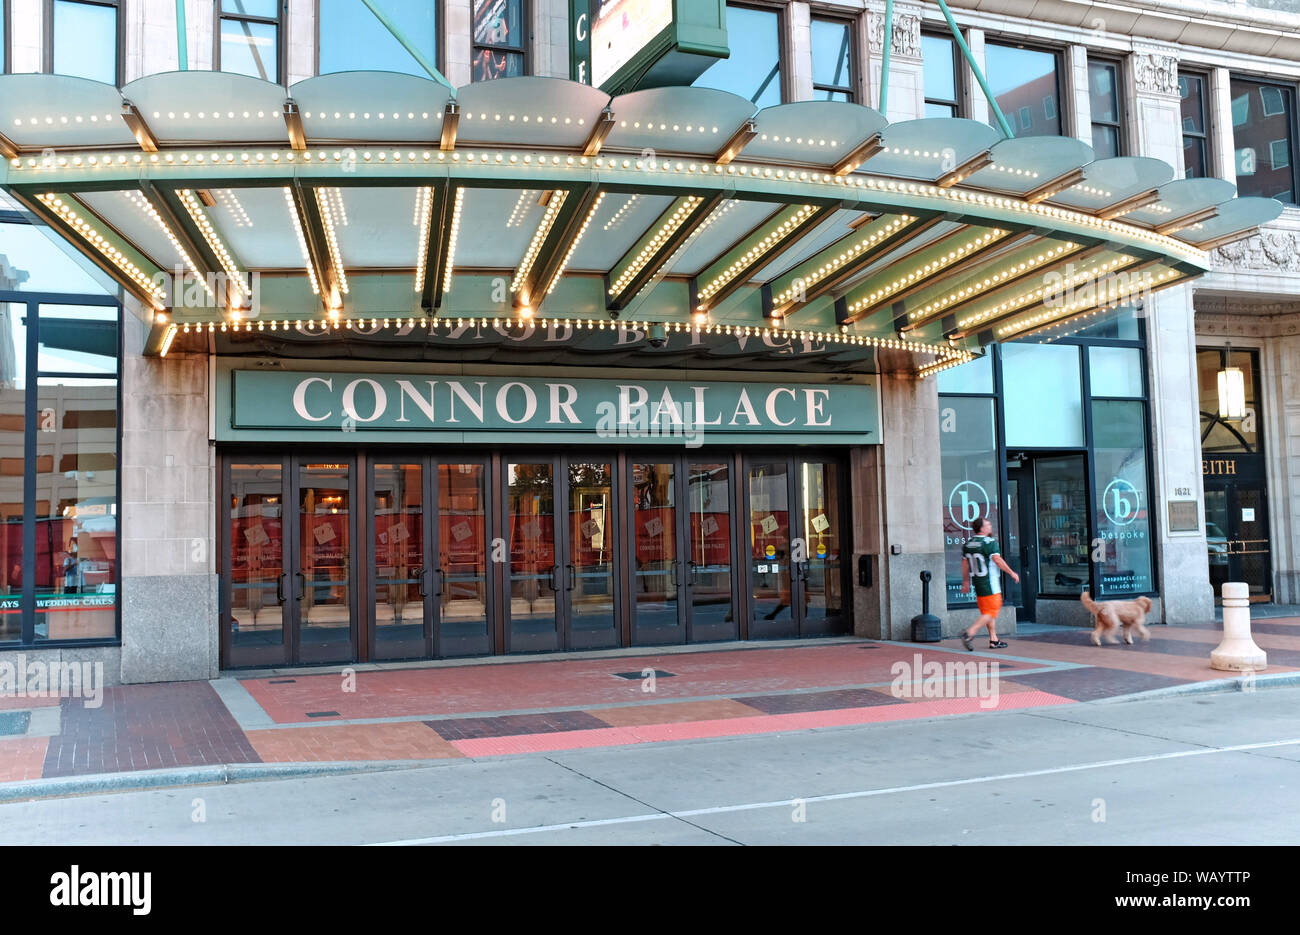 A man walks his dog past the Connor Palace theater in the Playhouse Square  performing arts district of downtown Cleveland, Ohio, USA Stock Photo -  Alamy